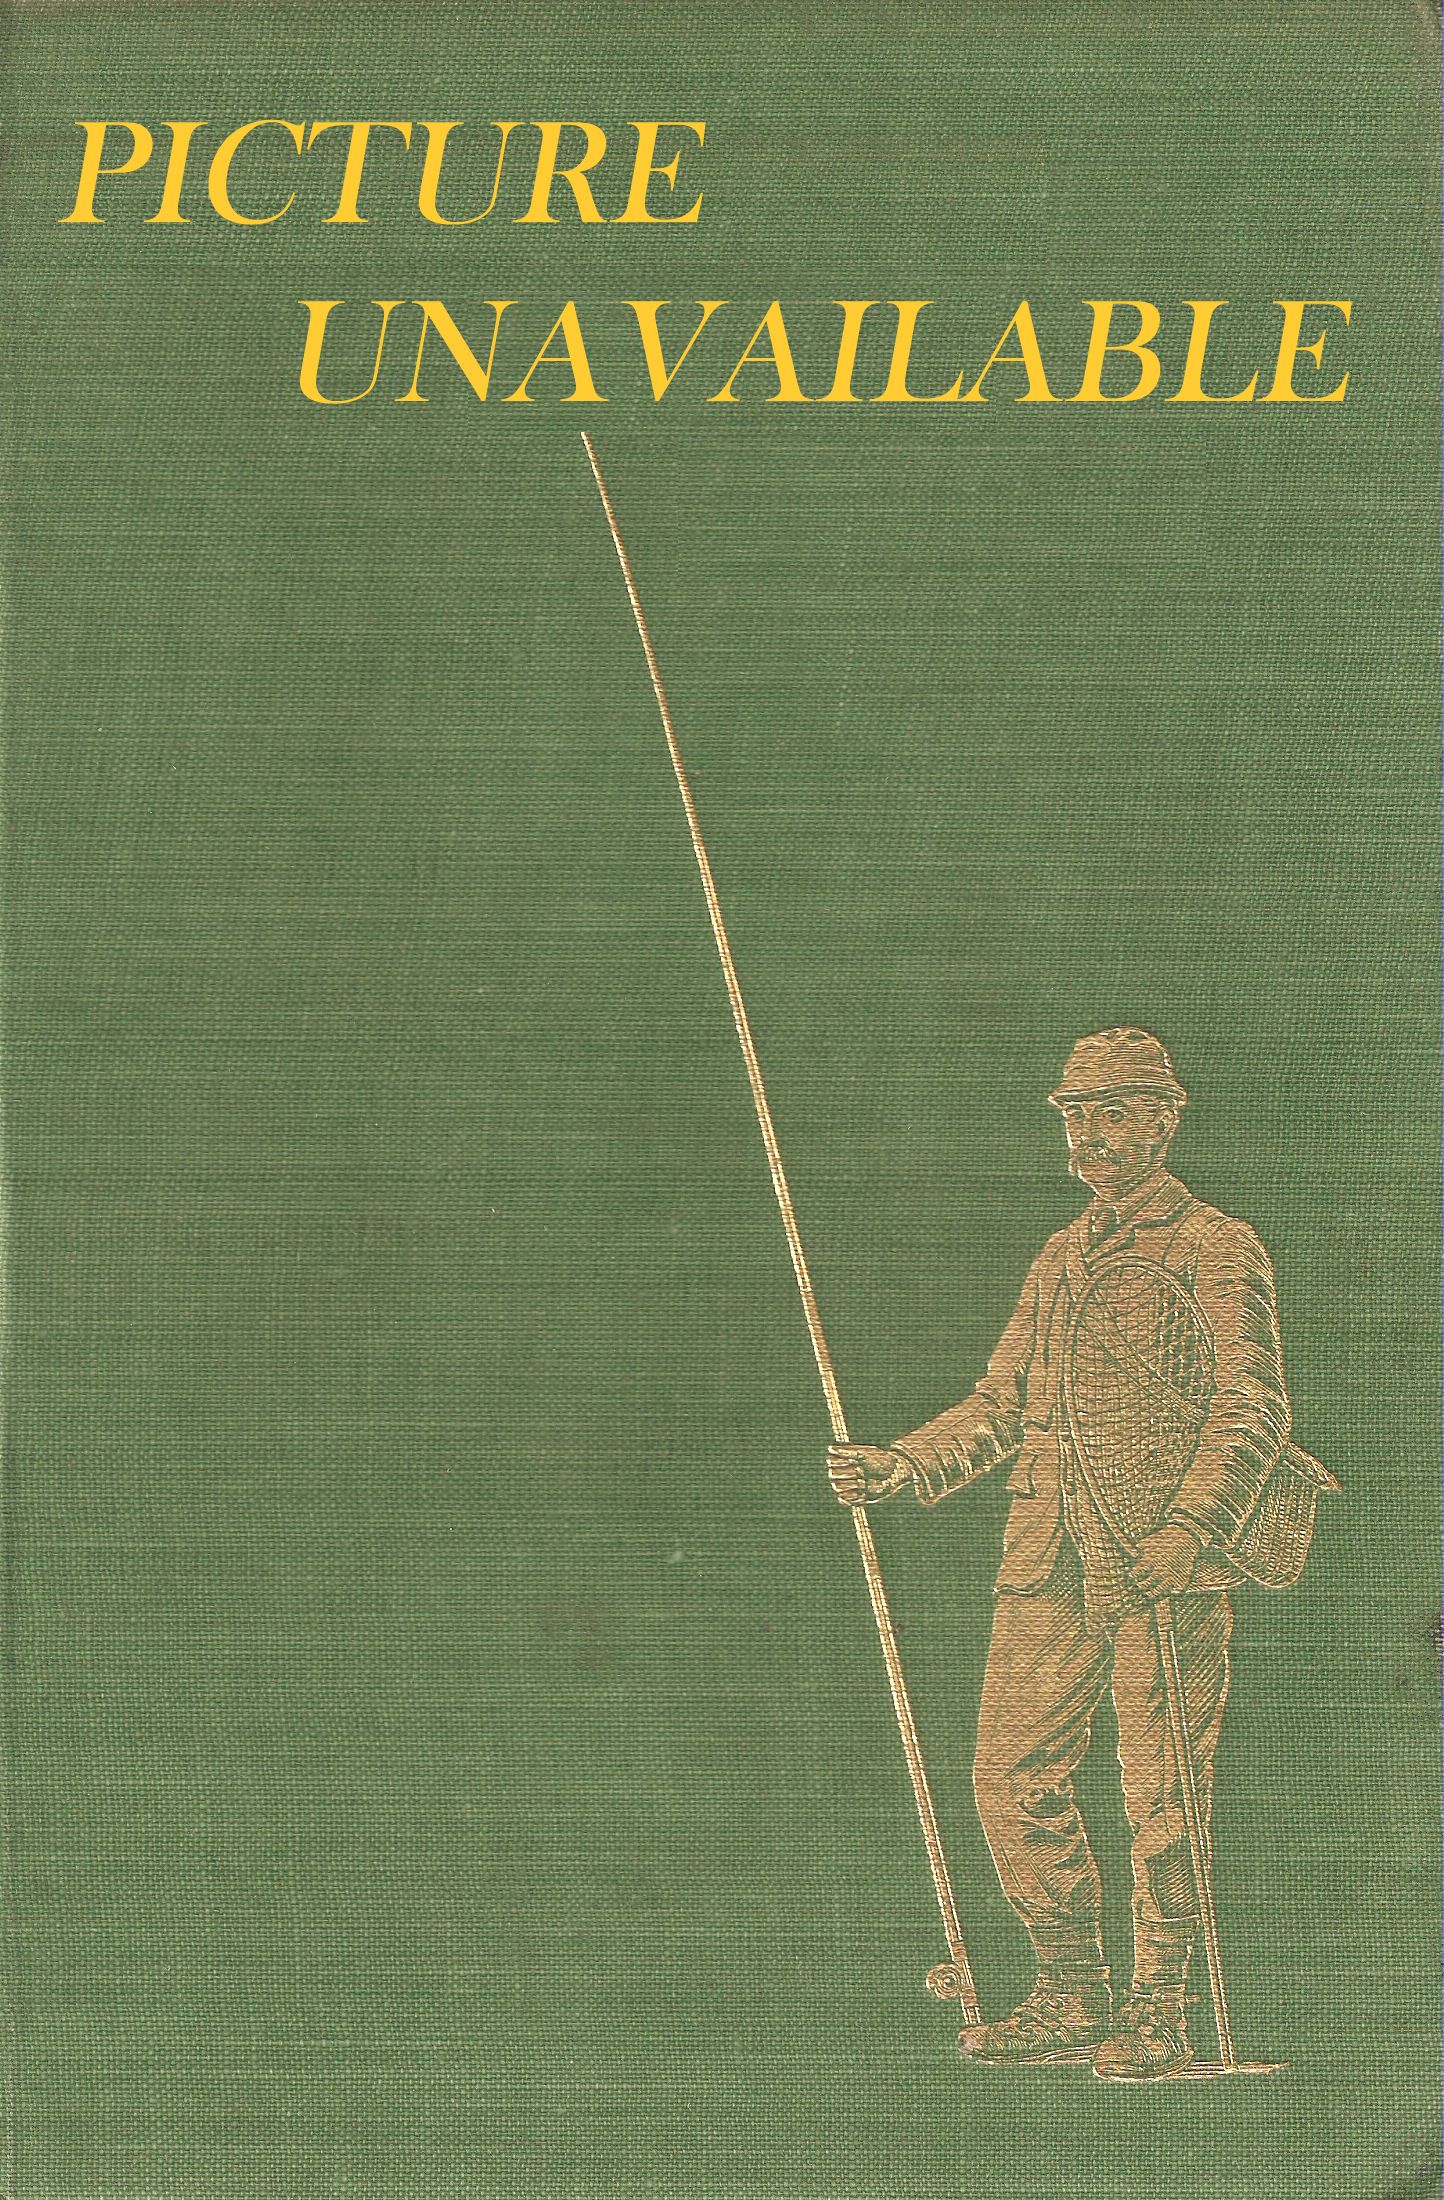 WEBLEY and SCOTT LIMITED; GUN and RIFLE CATALOGUE. July 1914. 1985 Tideline Books facsimile edition.